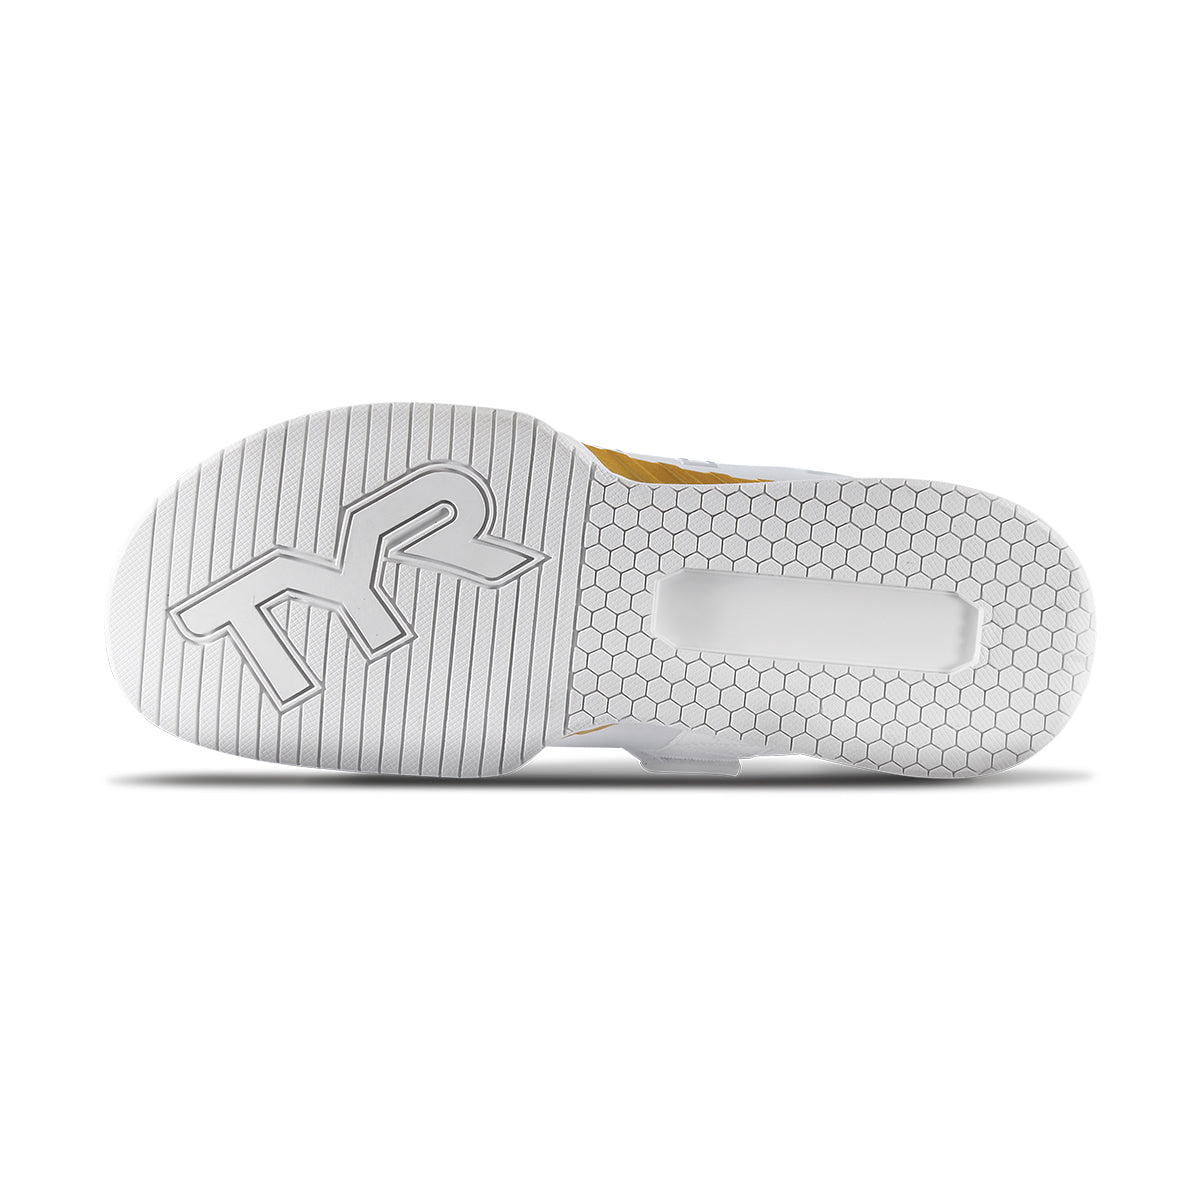 TYR L-1 Lifter Shoes (132 White/Gold - Limited Edition Squat University)